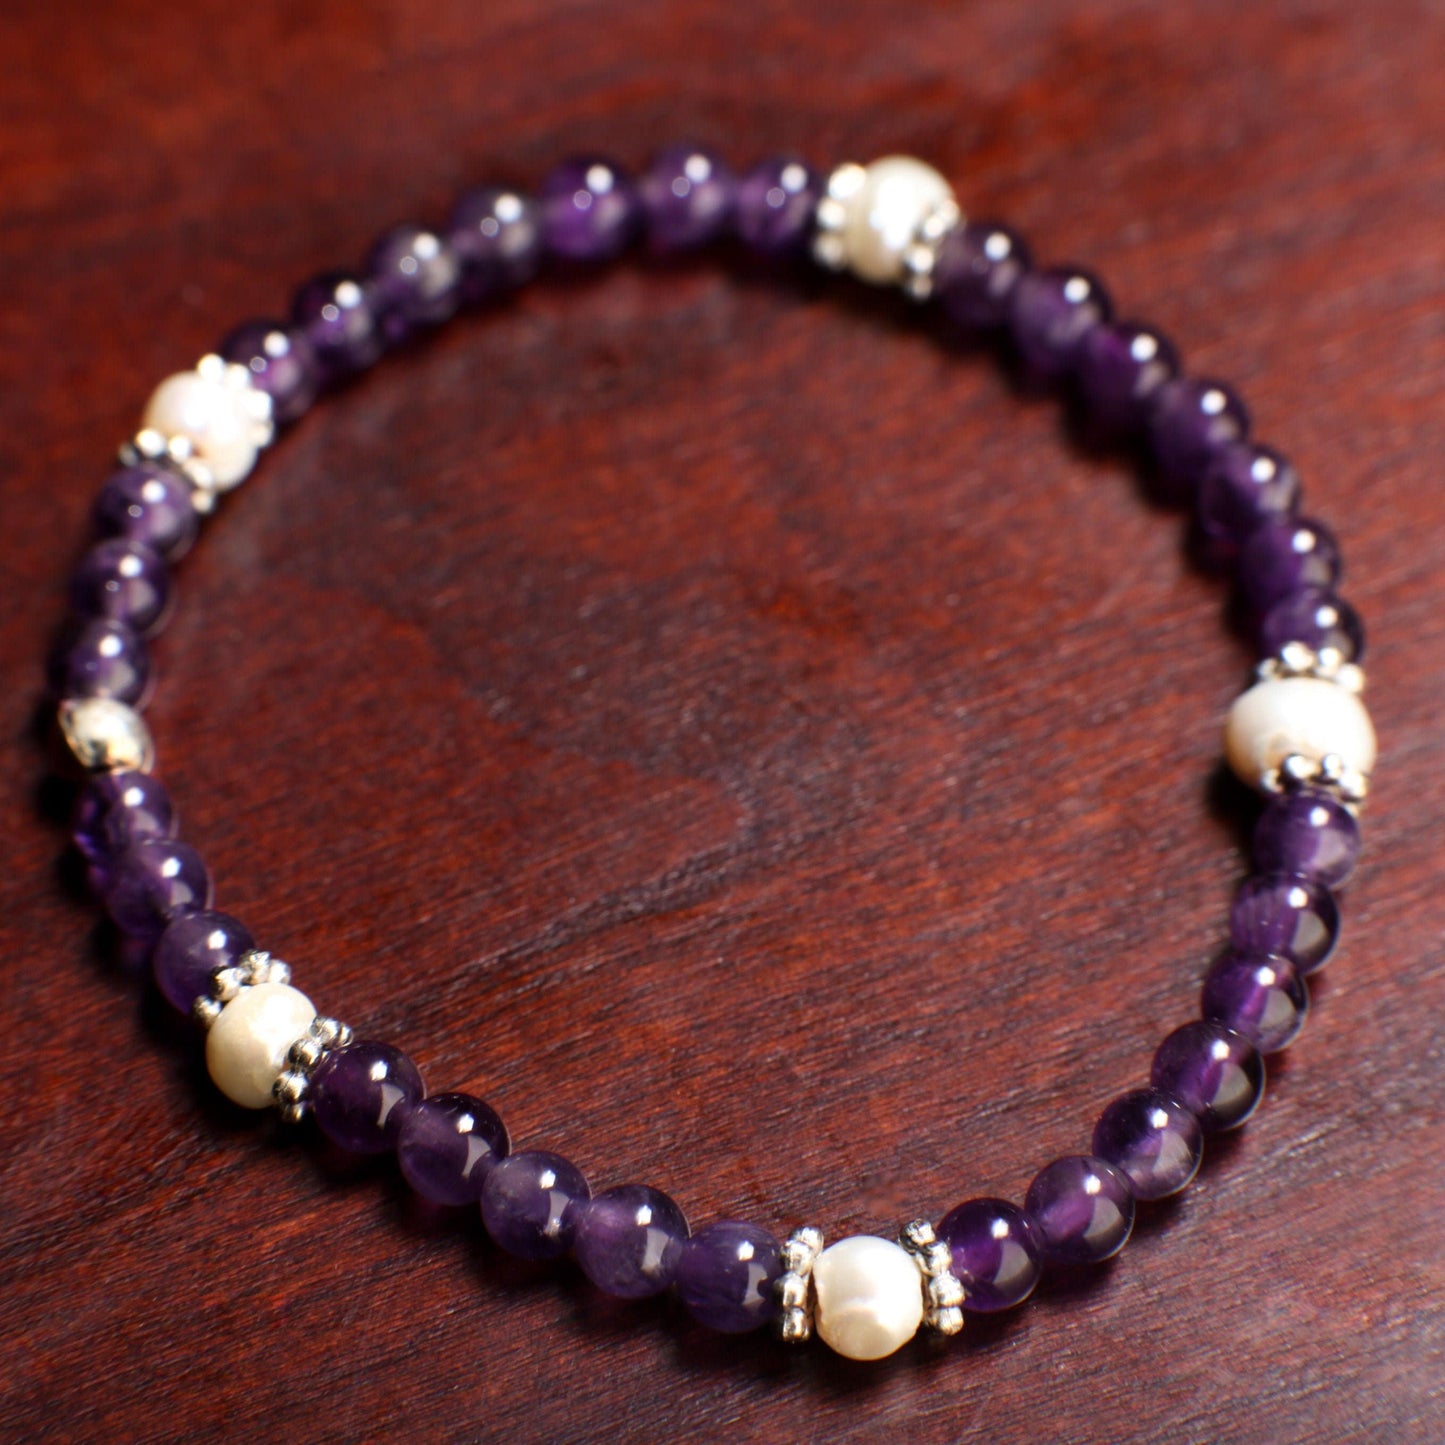 Natural Amethyst Round 4mm with Freshwater Pearl Rondelle Gemstone Bracelet, Healing Crystal, Yoga, Energy, Stretchy, Soothing Bracelet Gift